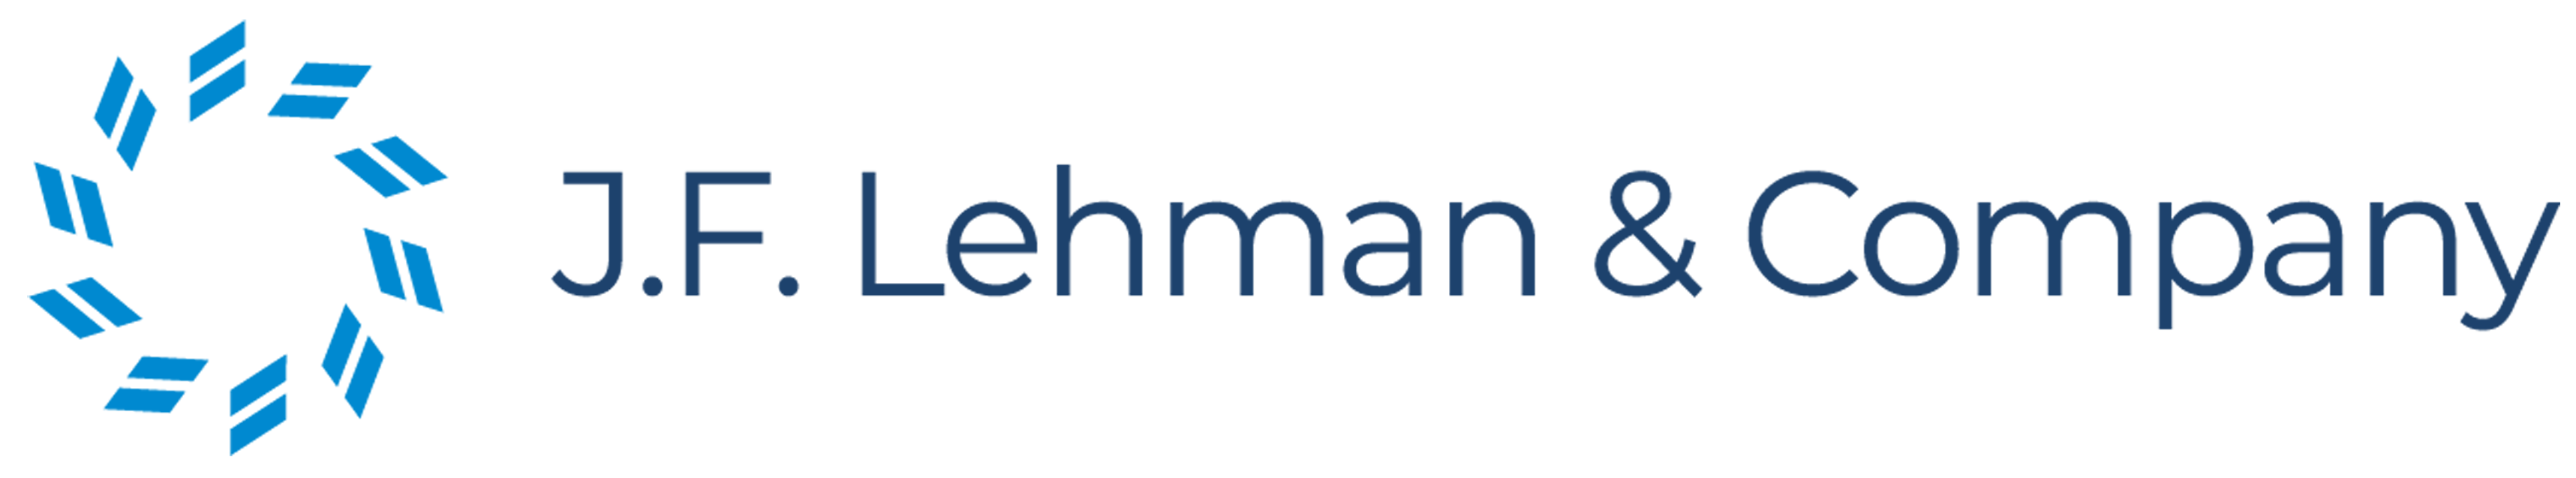 J.F. Lehman & Company Announces Key Promotions and New Team Members, January 6 2022